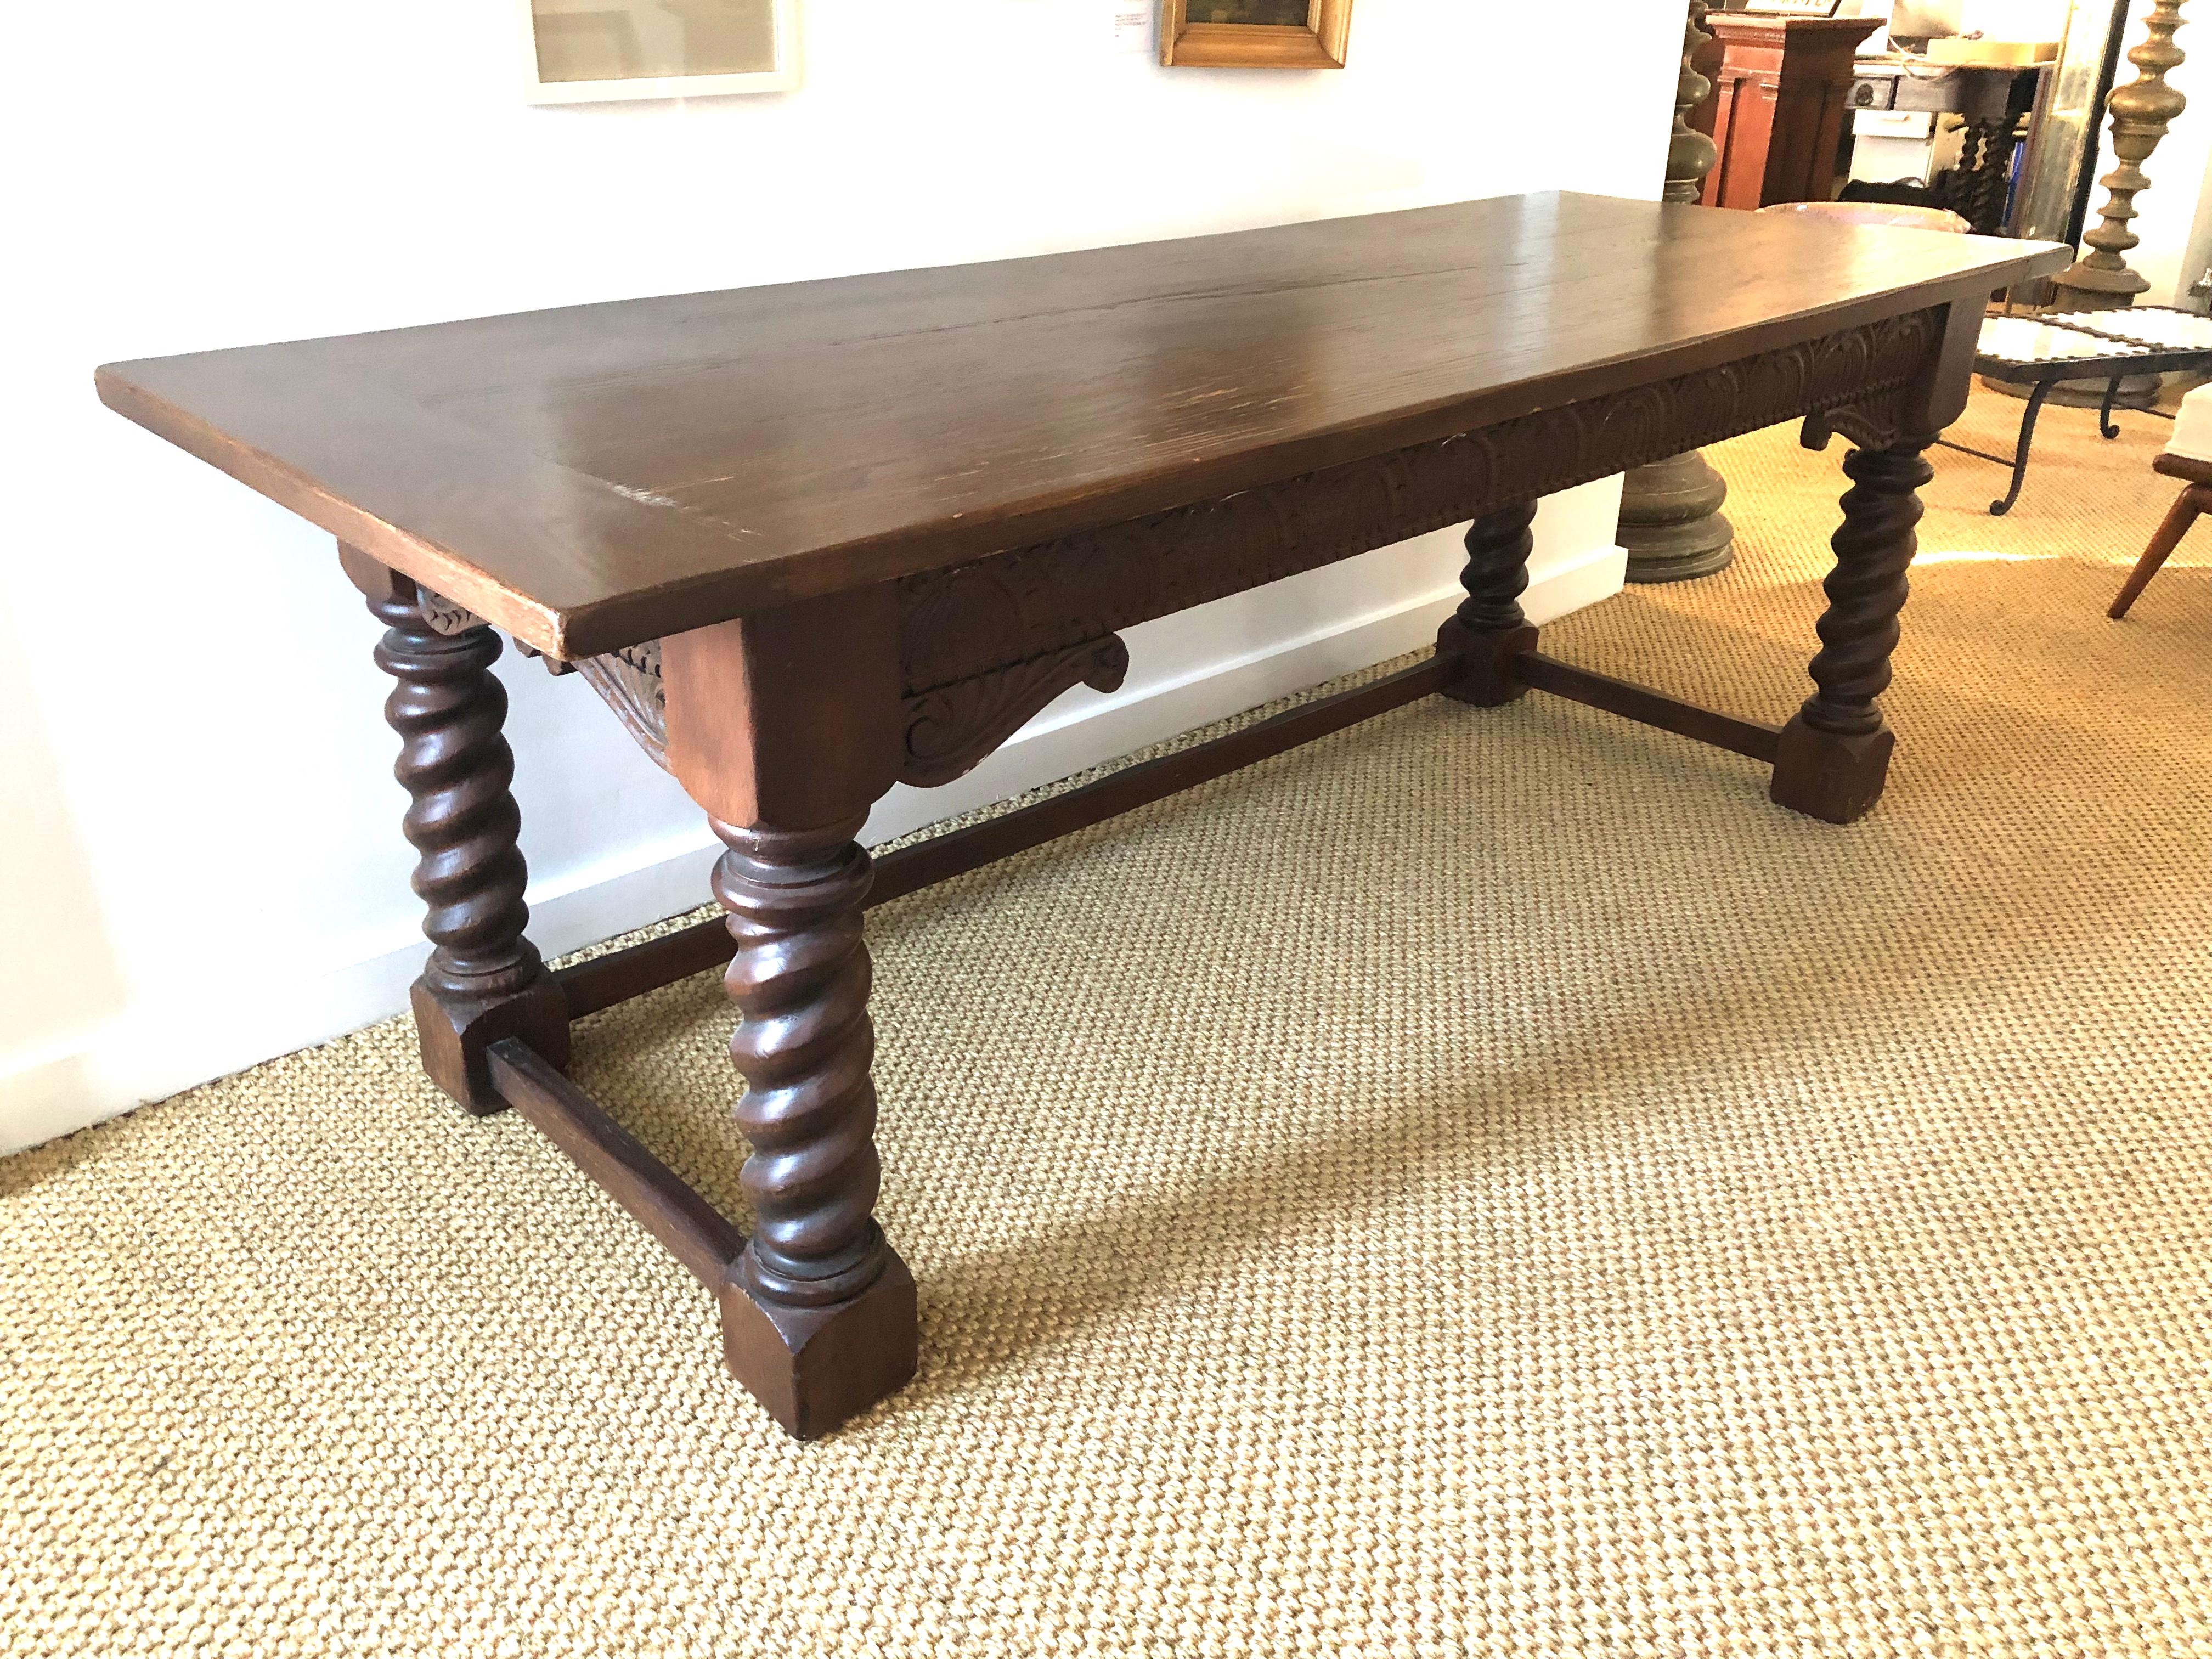 A Jacobean style carved solid oak refectory table the rectangular top with hand hewn edges and breadboard ends, over a frieze carved fan and scroll decorations raised on 4 barley twist legs joined by 3 hand hewn cross stretchers. One stretcher was